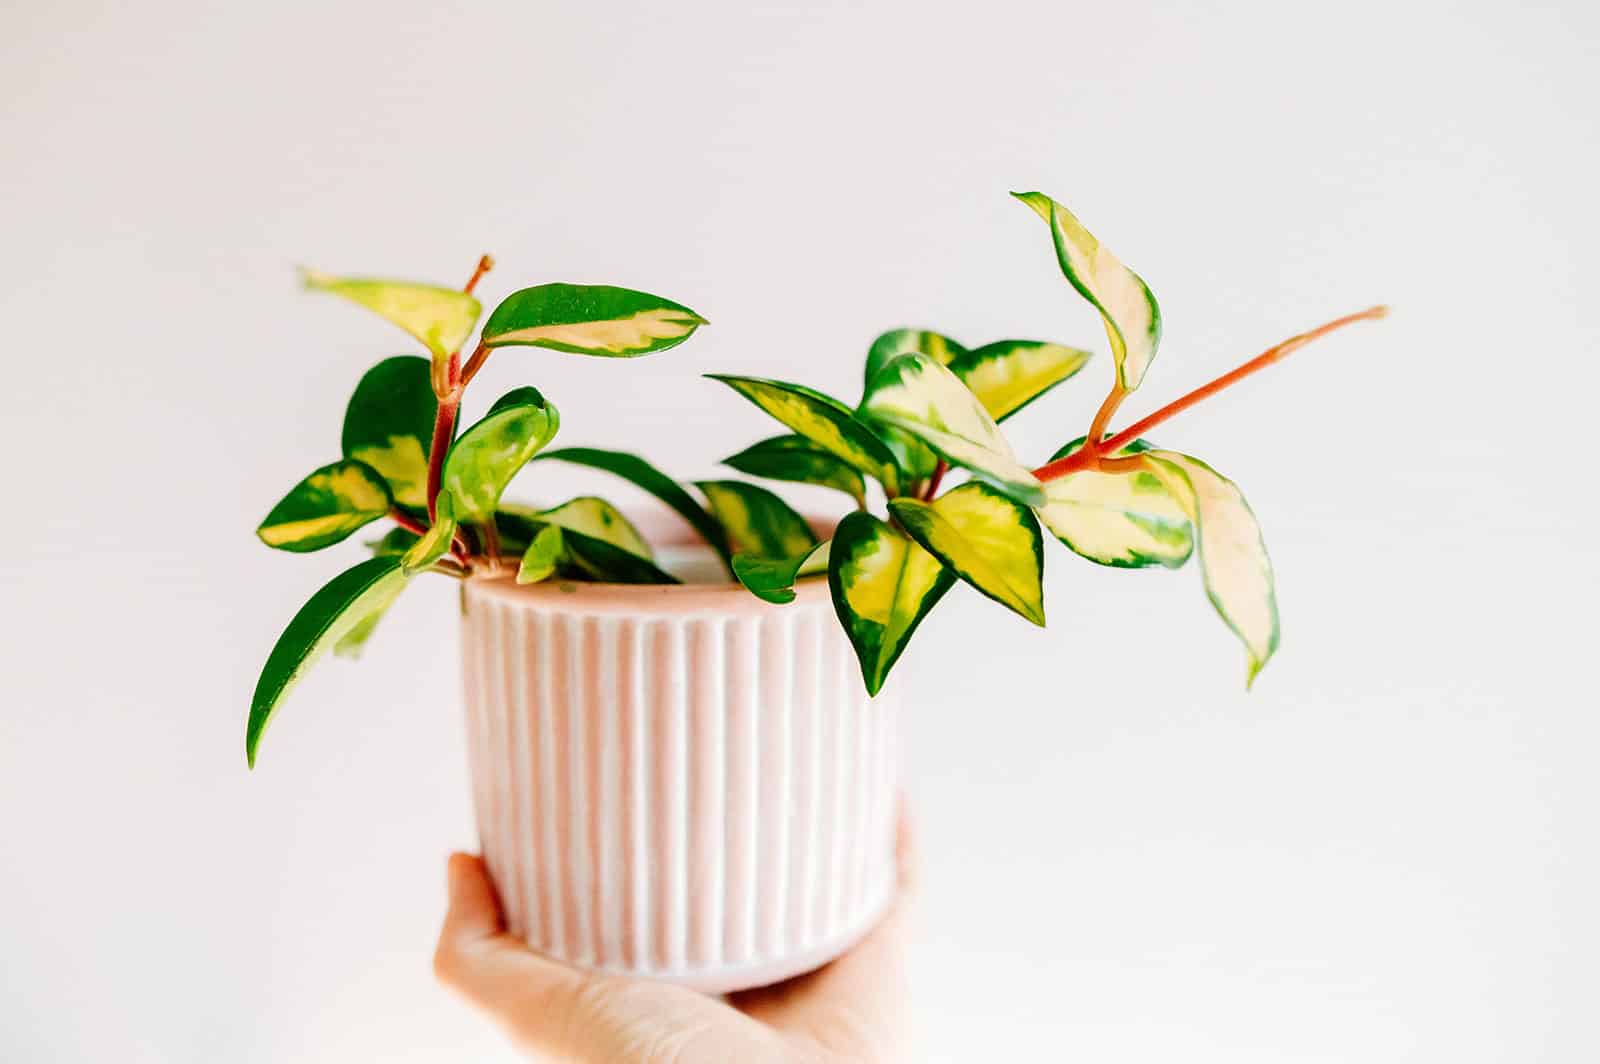 Hand holding a small potted Hoya carnosa plant against a white background